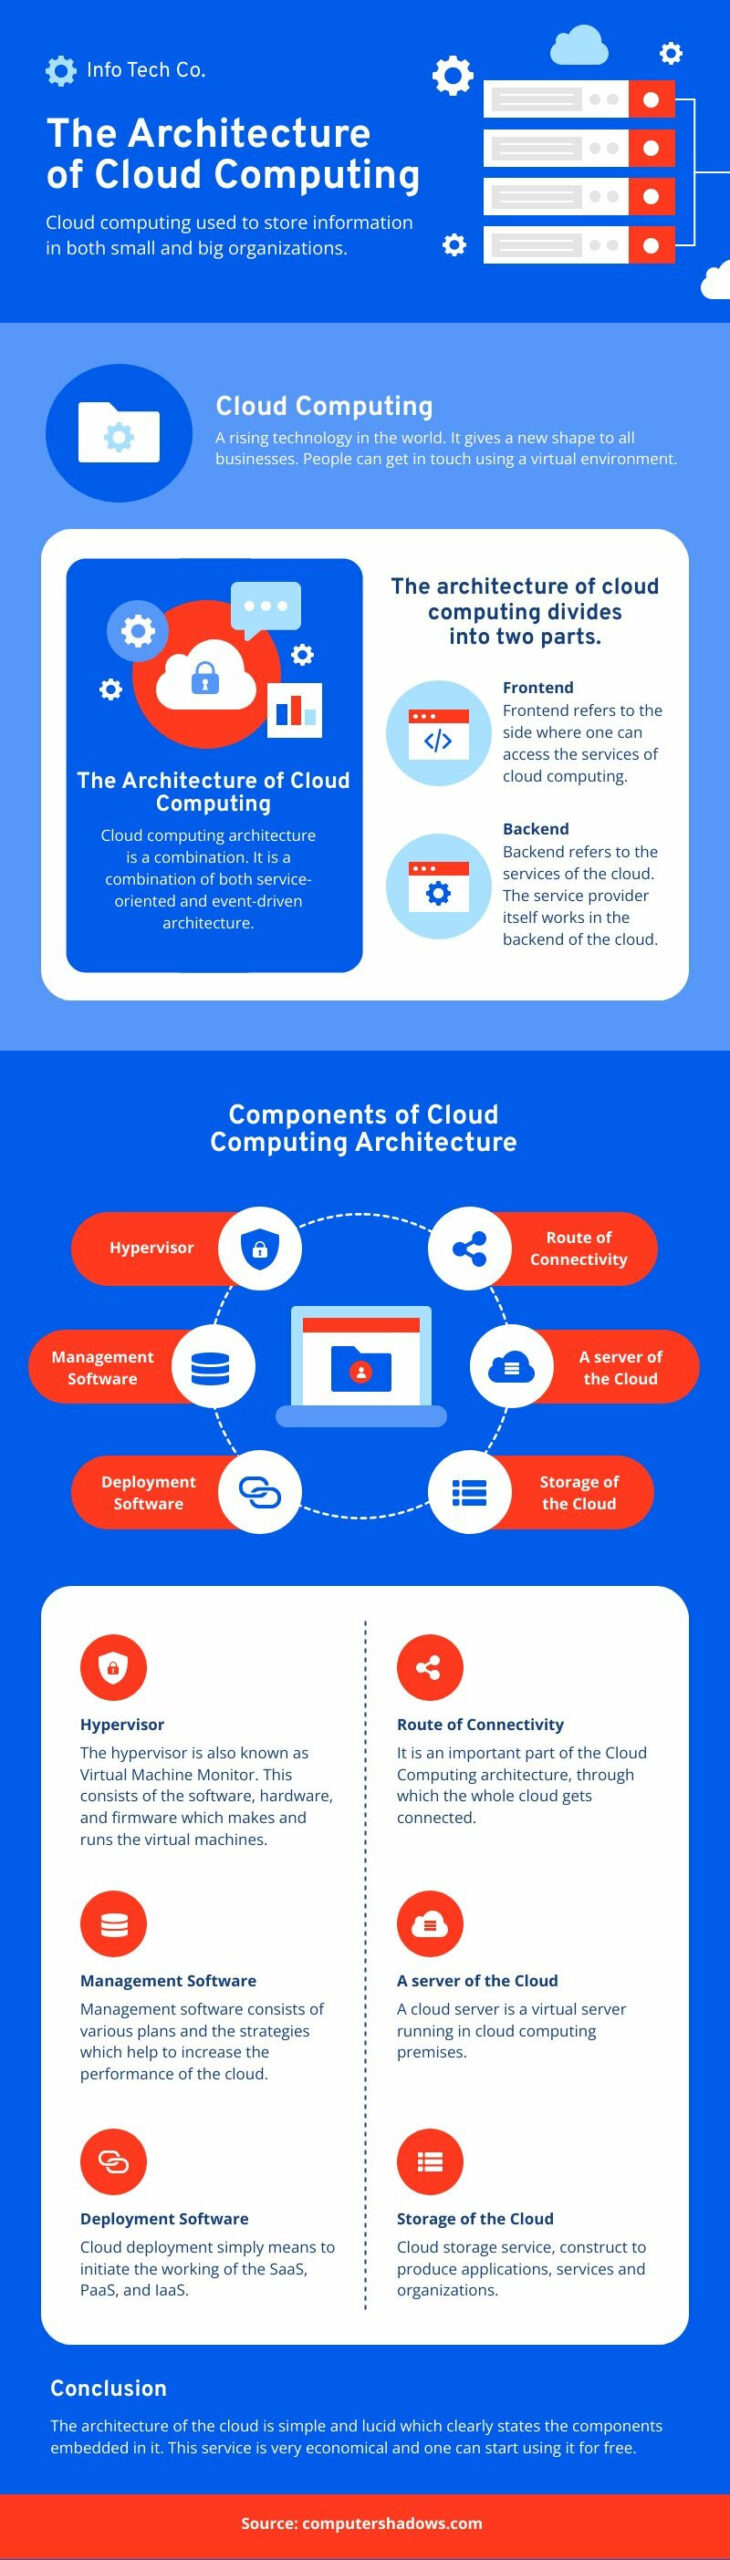 cloud computing architecture infographic